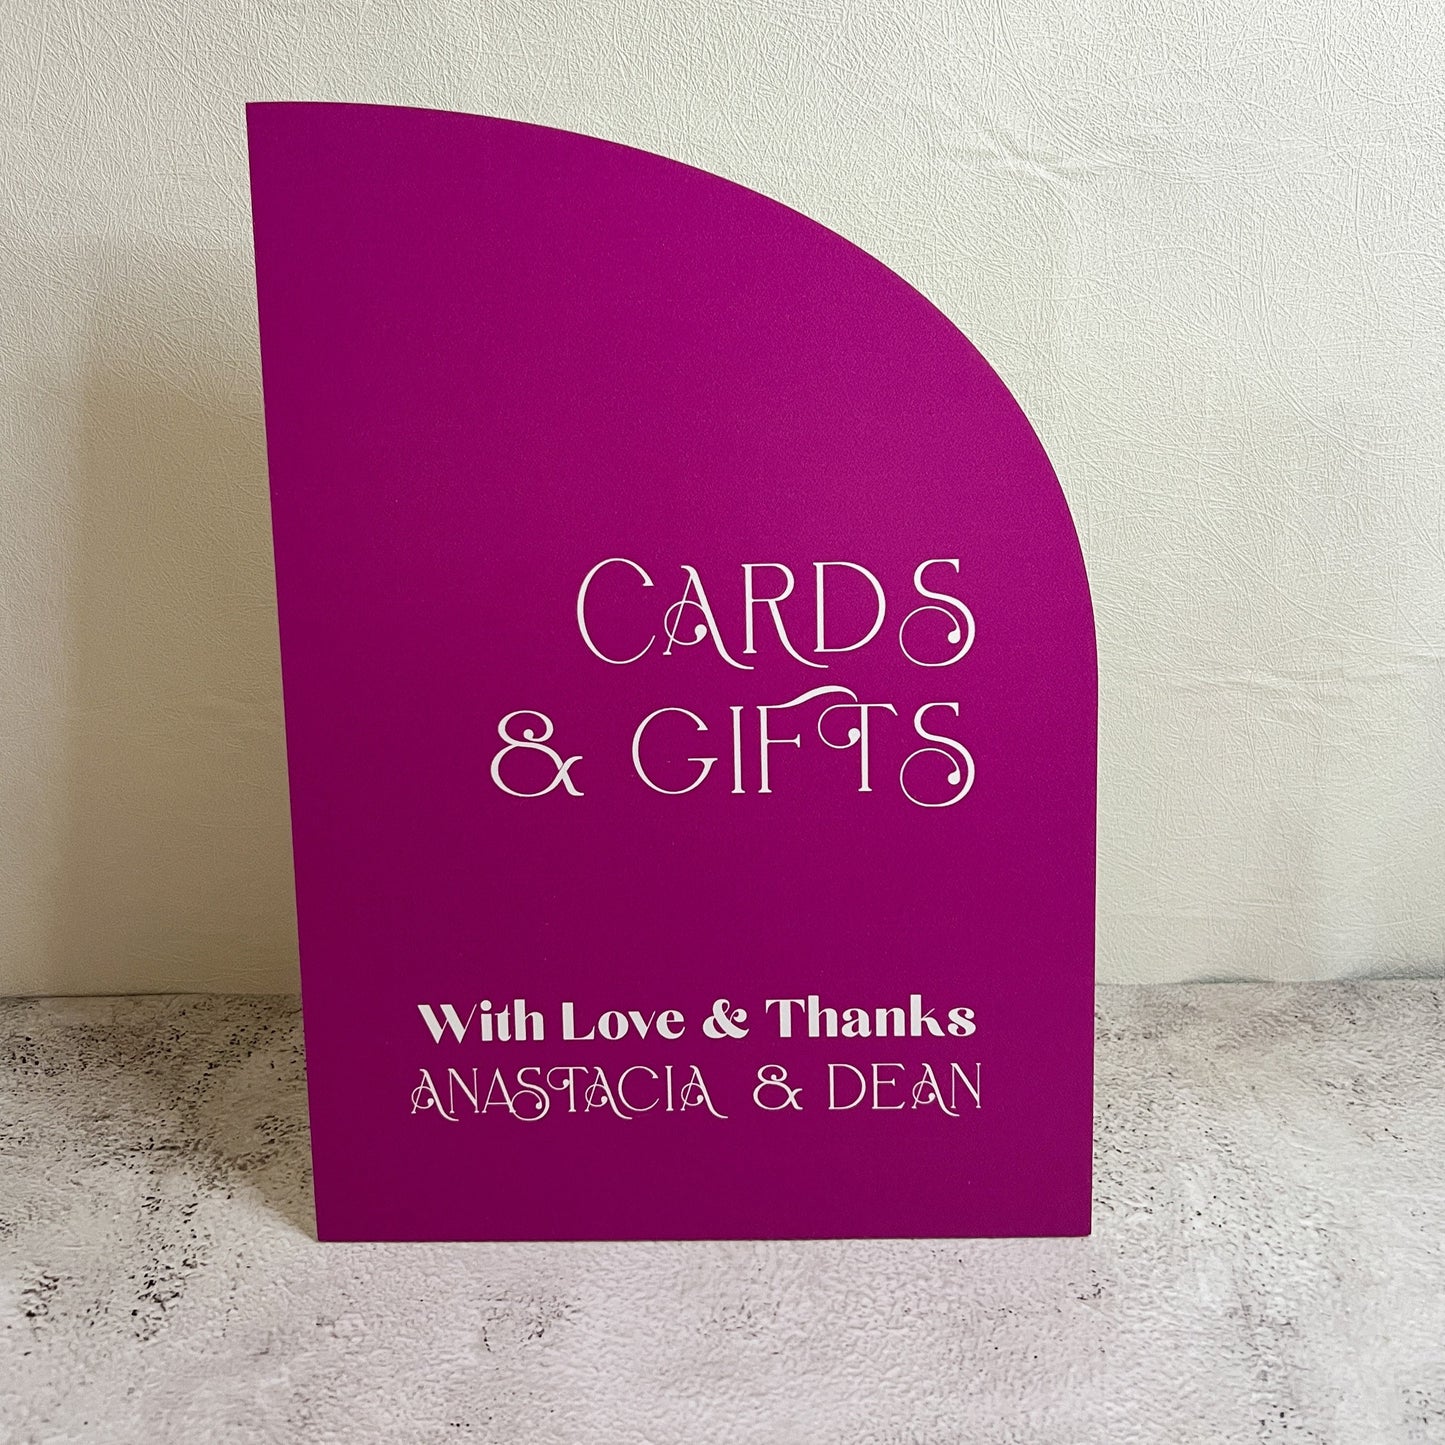 Anastacia Wishing Well / Cards and Gifts Sign - Glitzy Prints